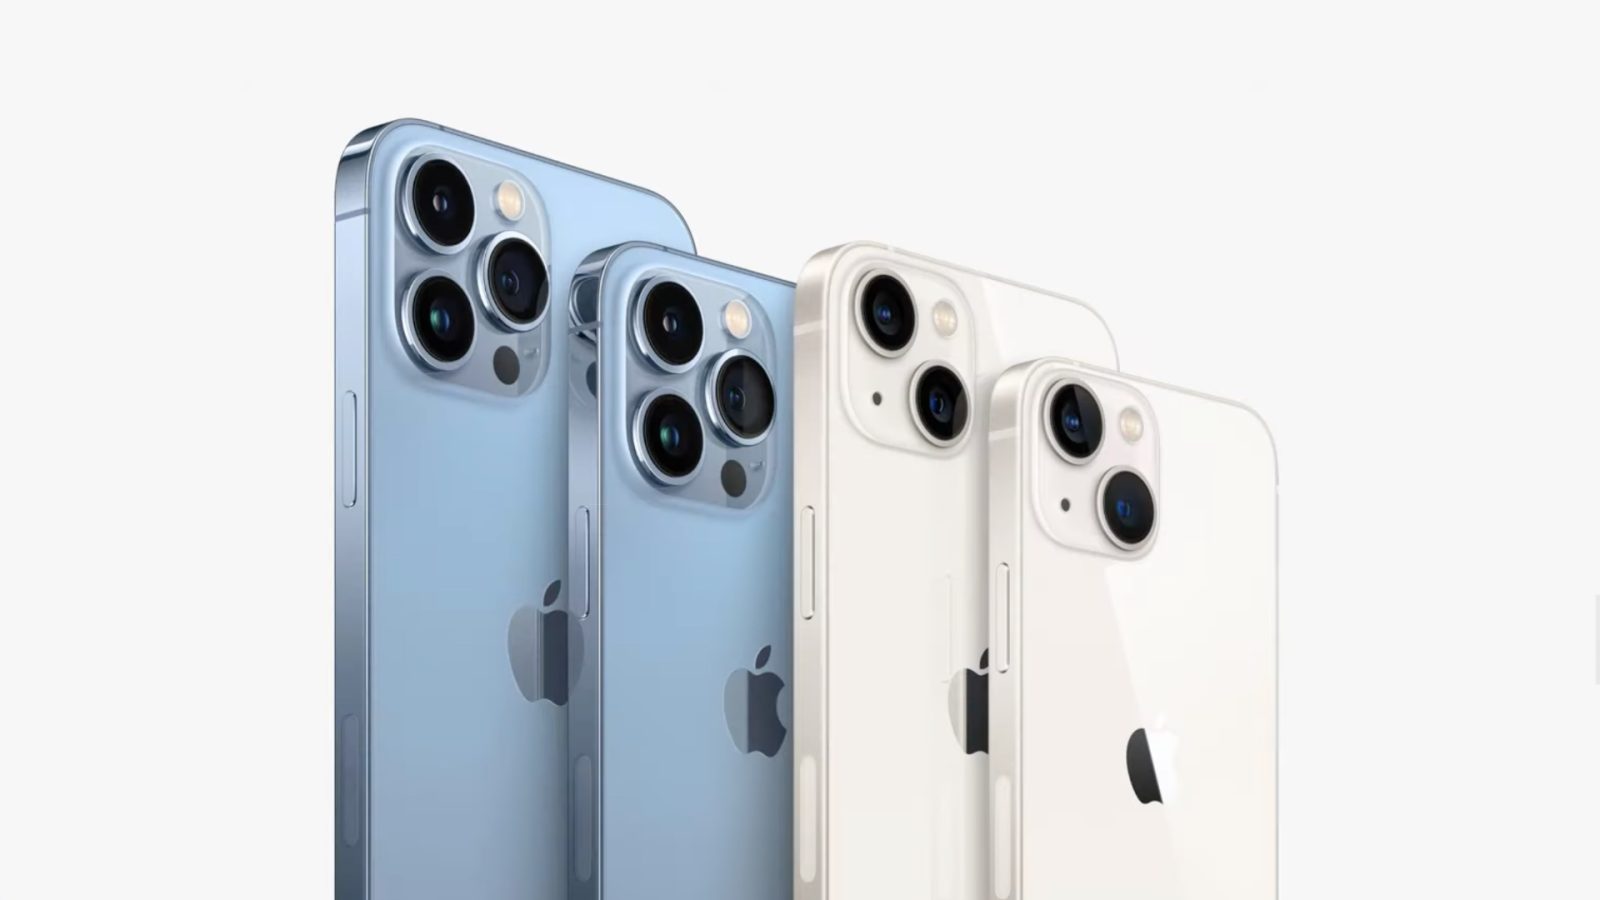 All iPhone 13 models